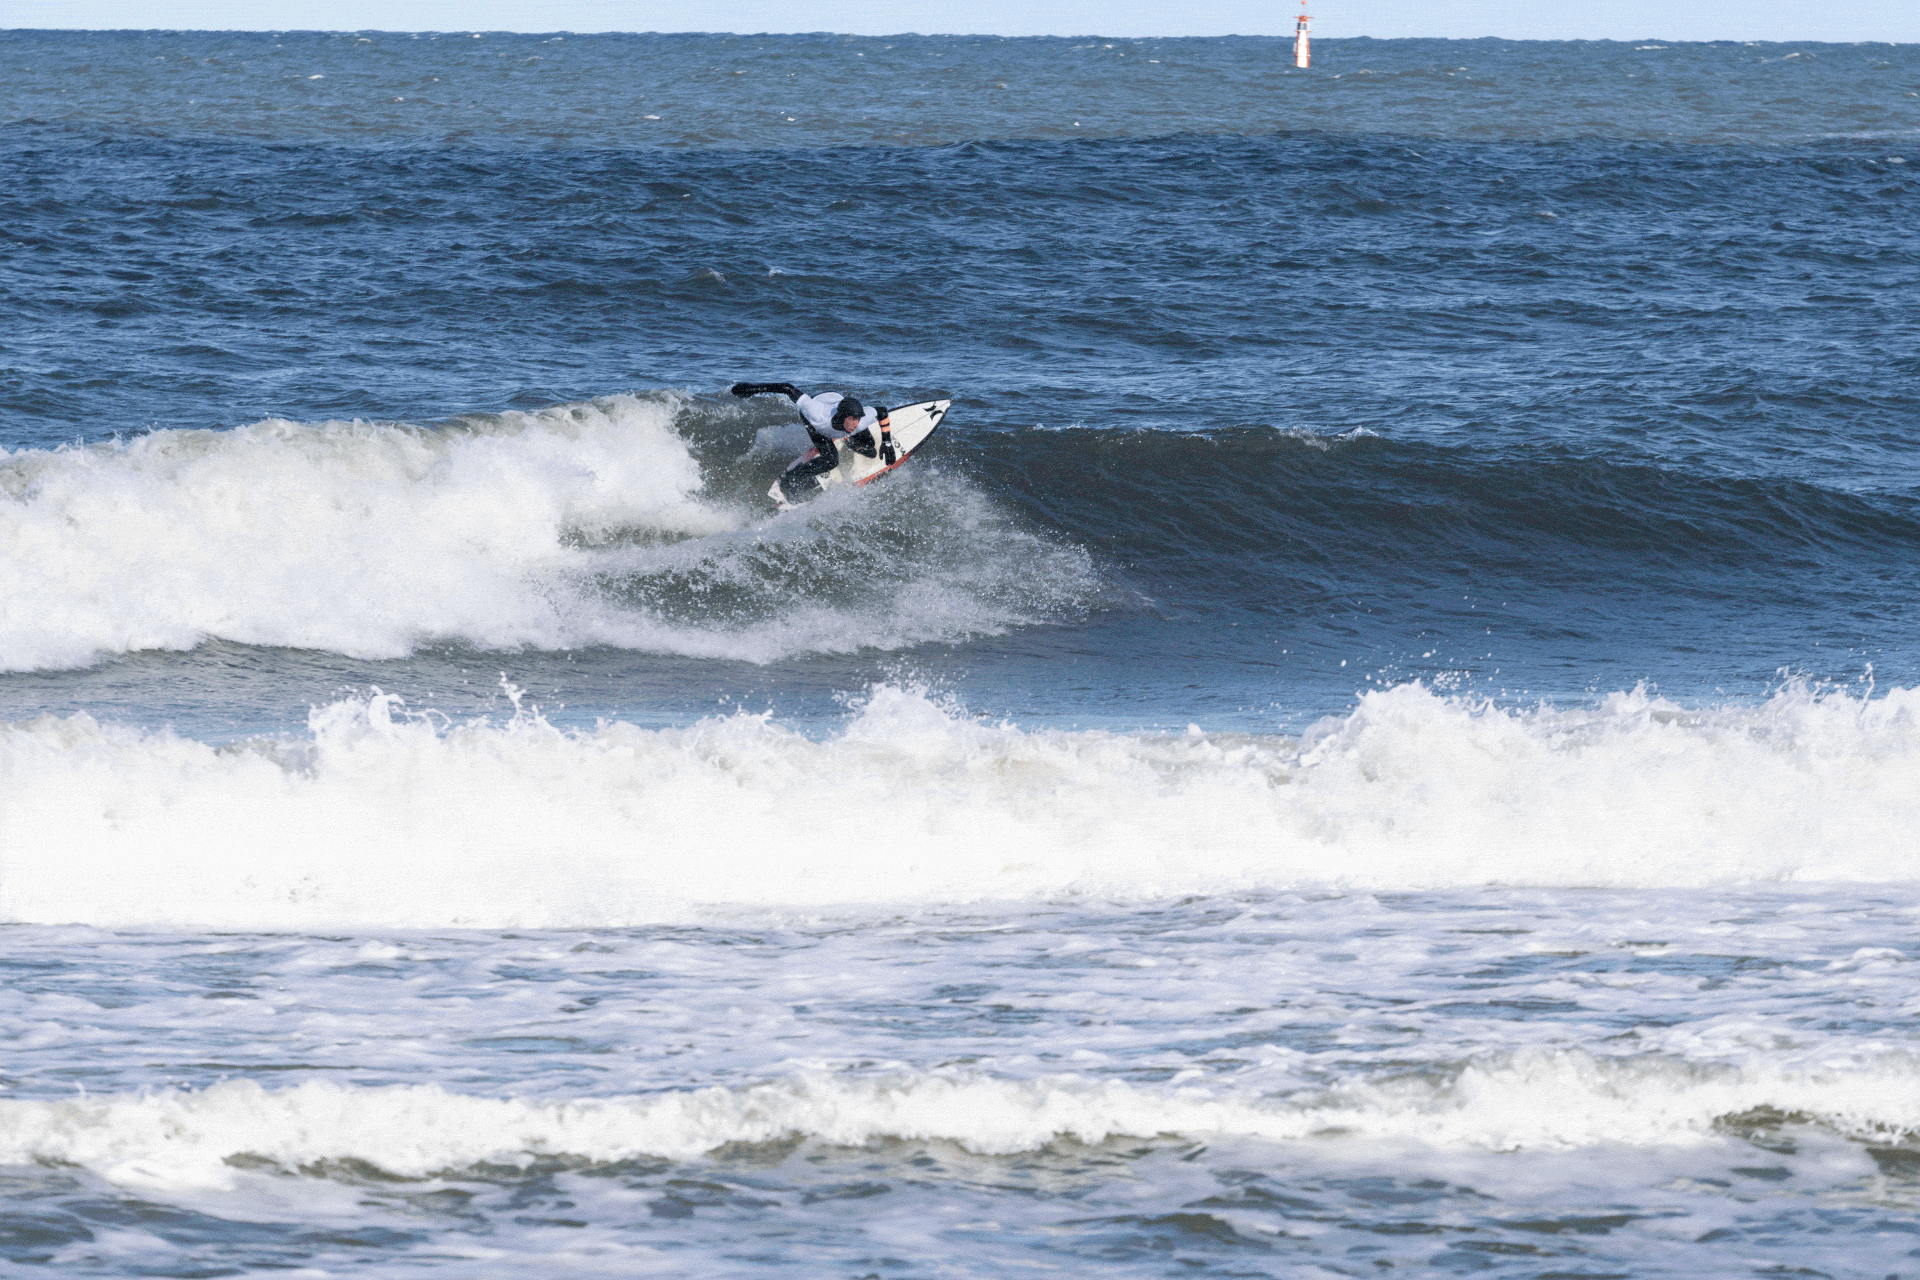 Iker Trigueros during the Cold Waves by Porsche GIF competition.